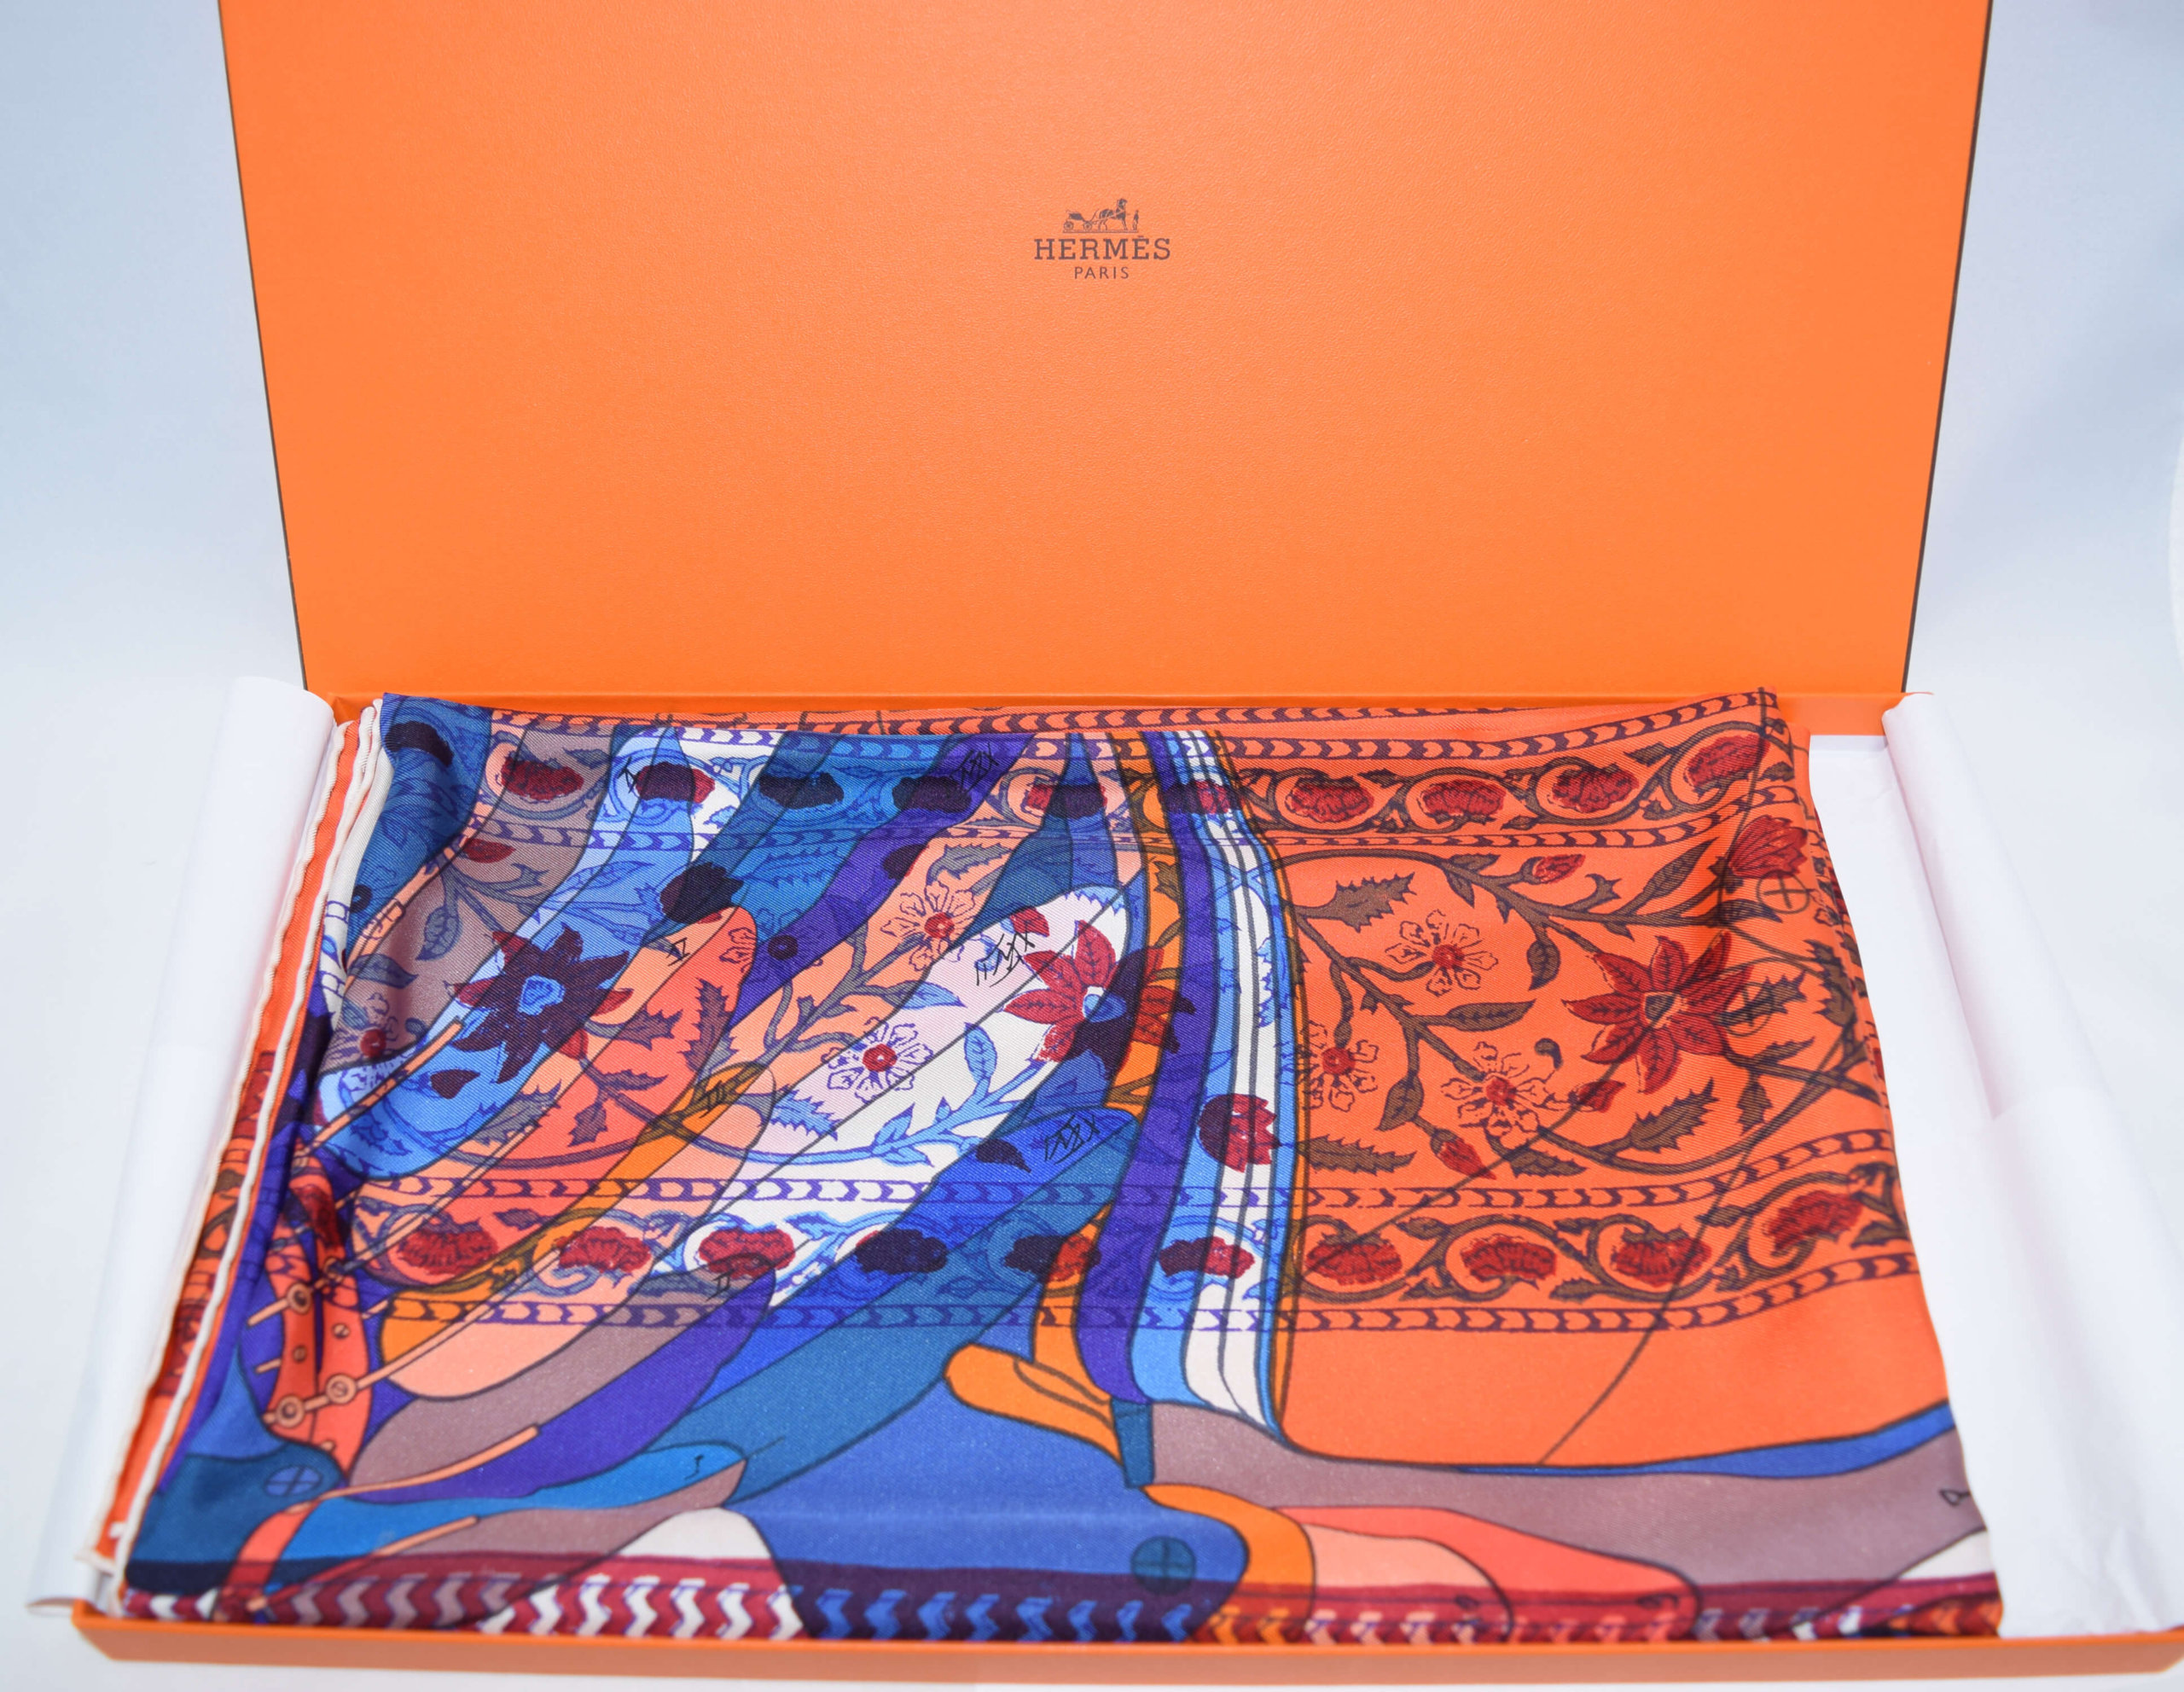 HERMÉS LE PEGASE D' HERMES SILK SCARF sold at auction on 2nd December